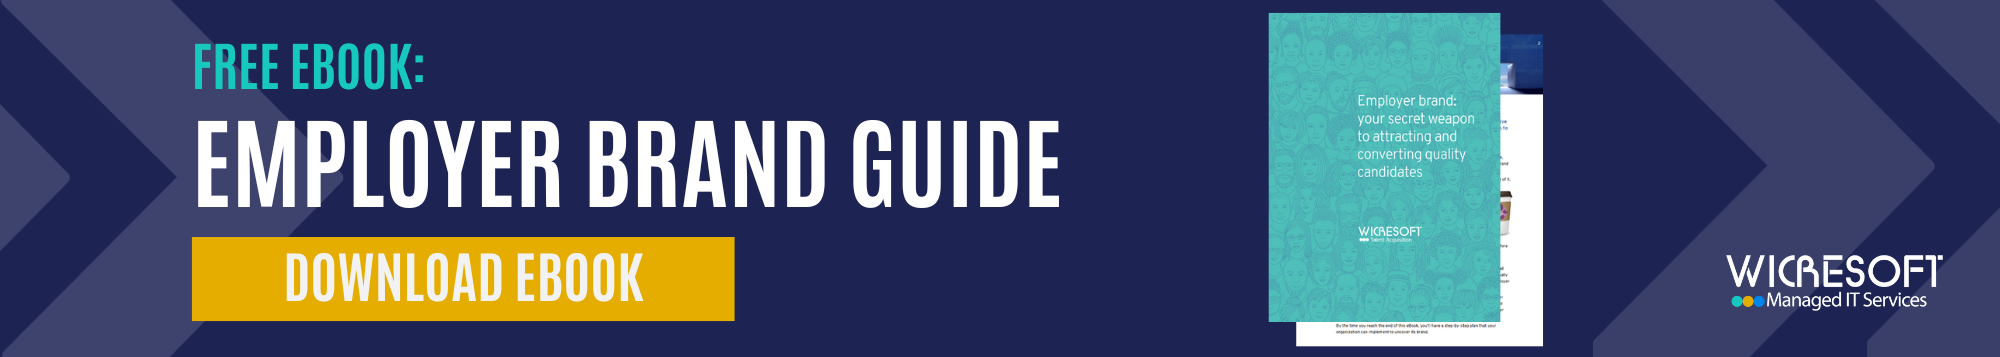 Download the Free Employer Brand Guide